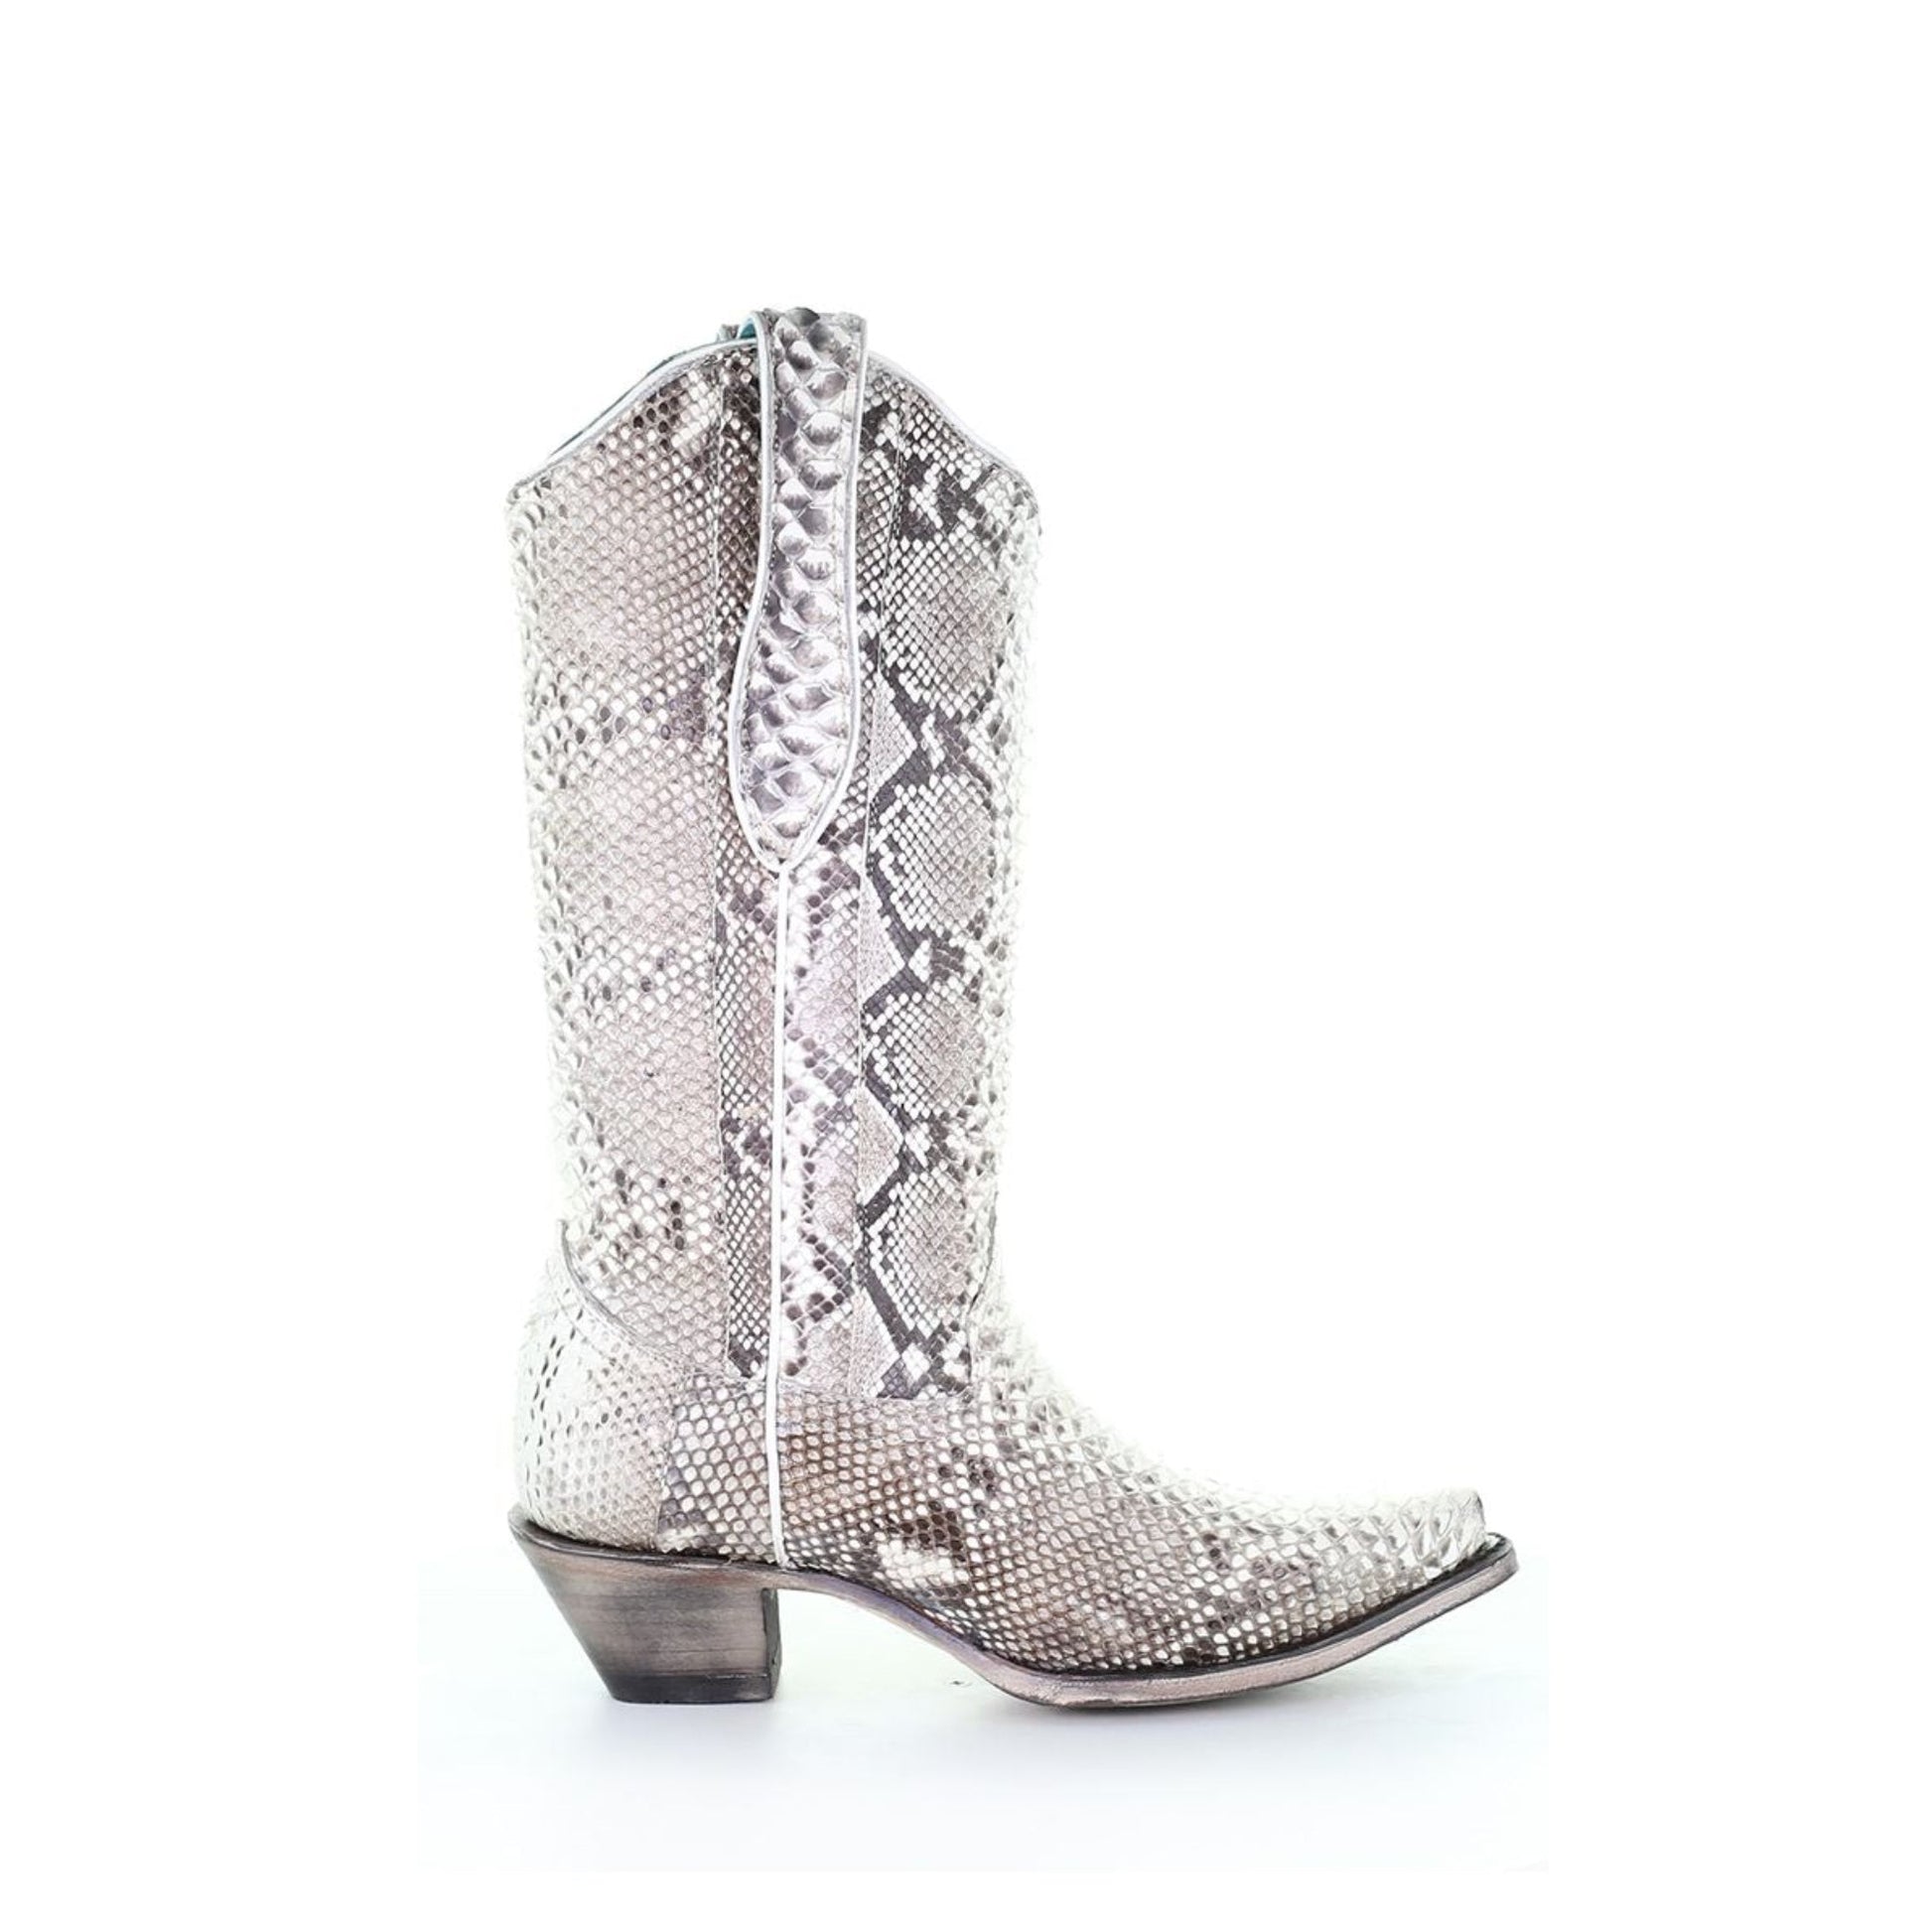 A3798 - Corral western cowboy python snip boots for women-BOOTS-kuet